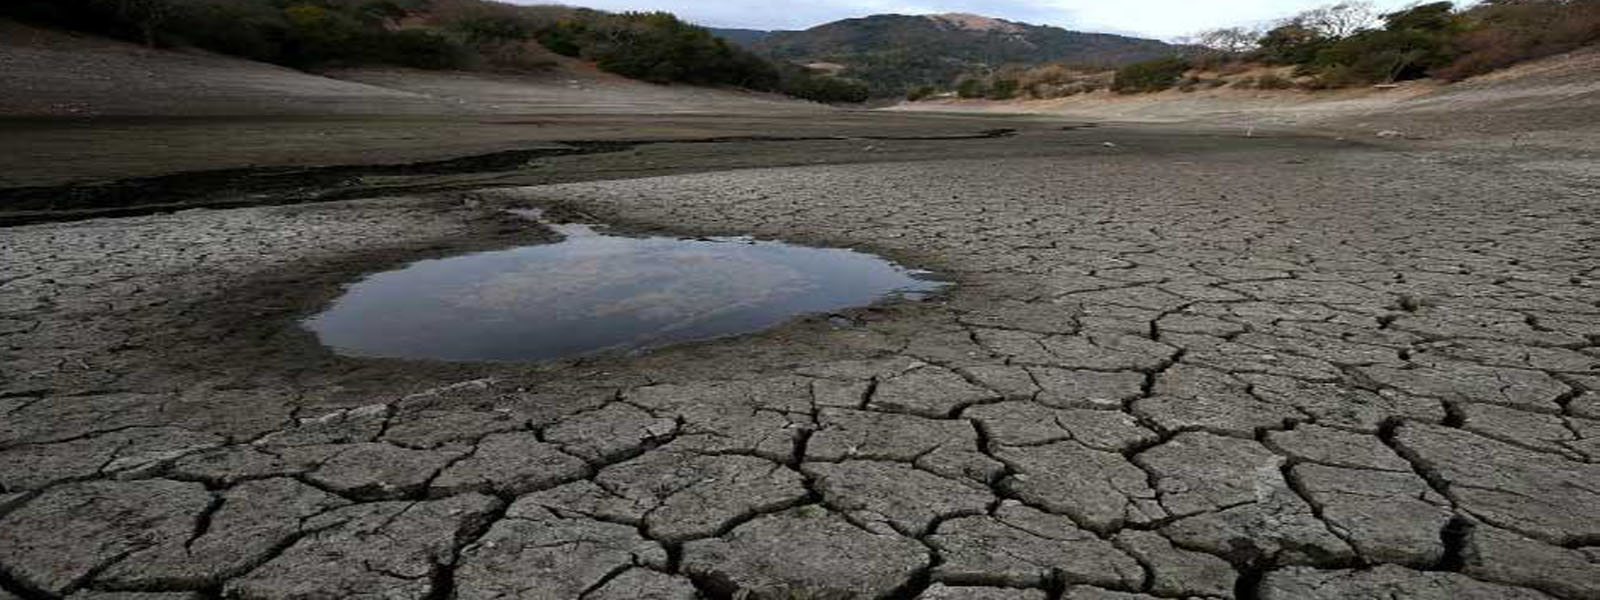 Dry weather affects nearly 900,000